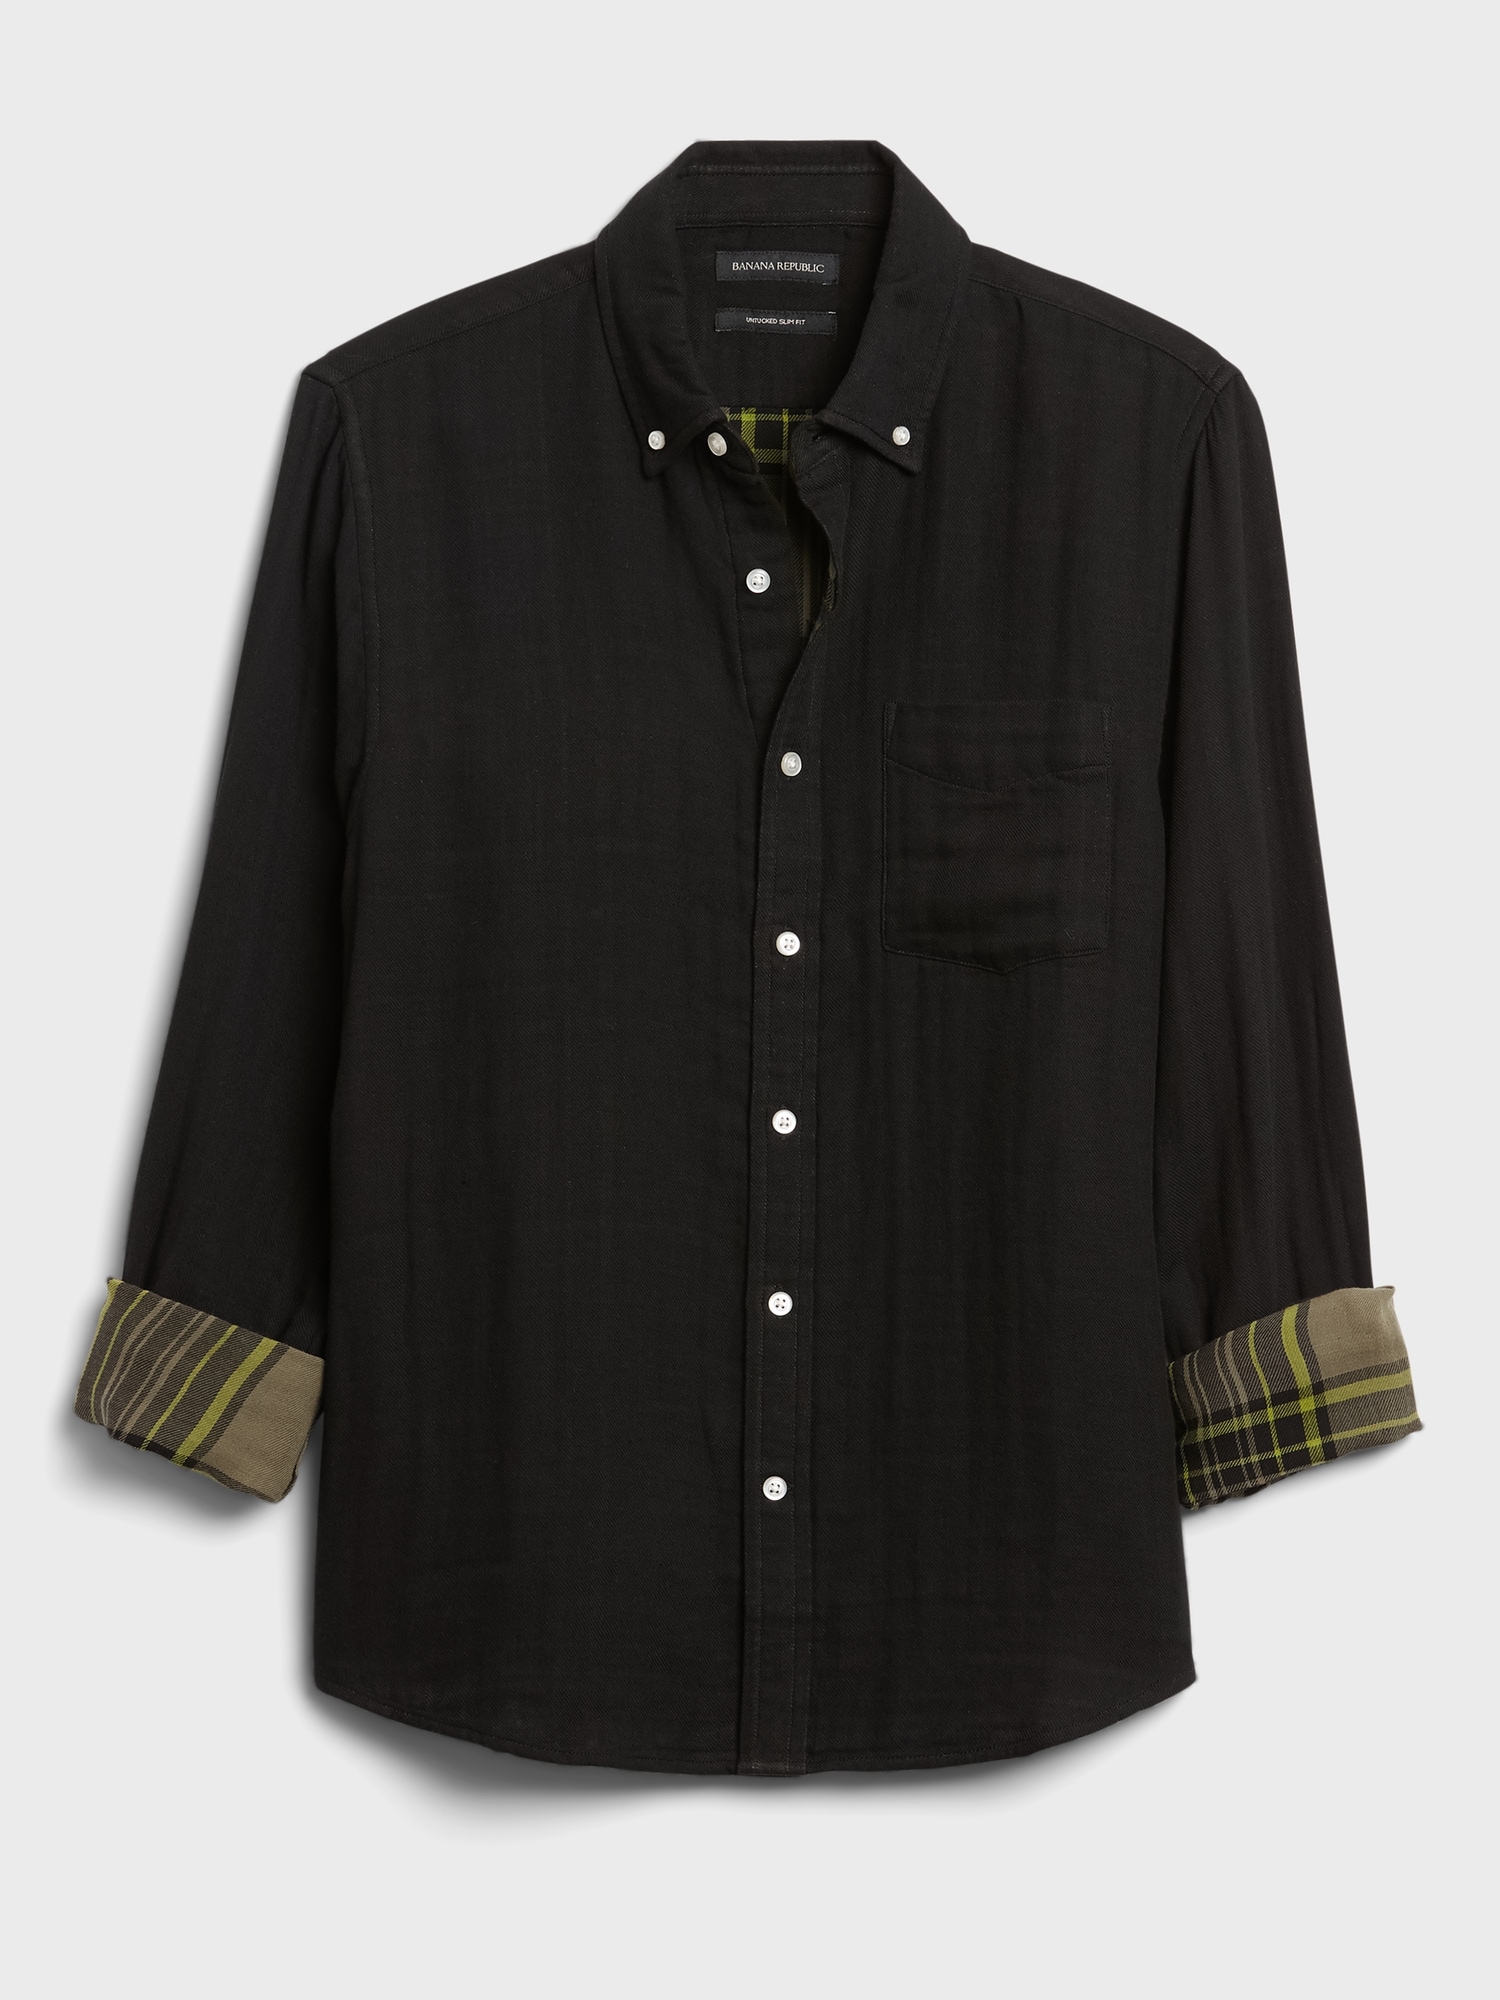 Untucked Slim-Fit Double-Weave Shirt